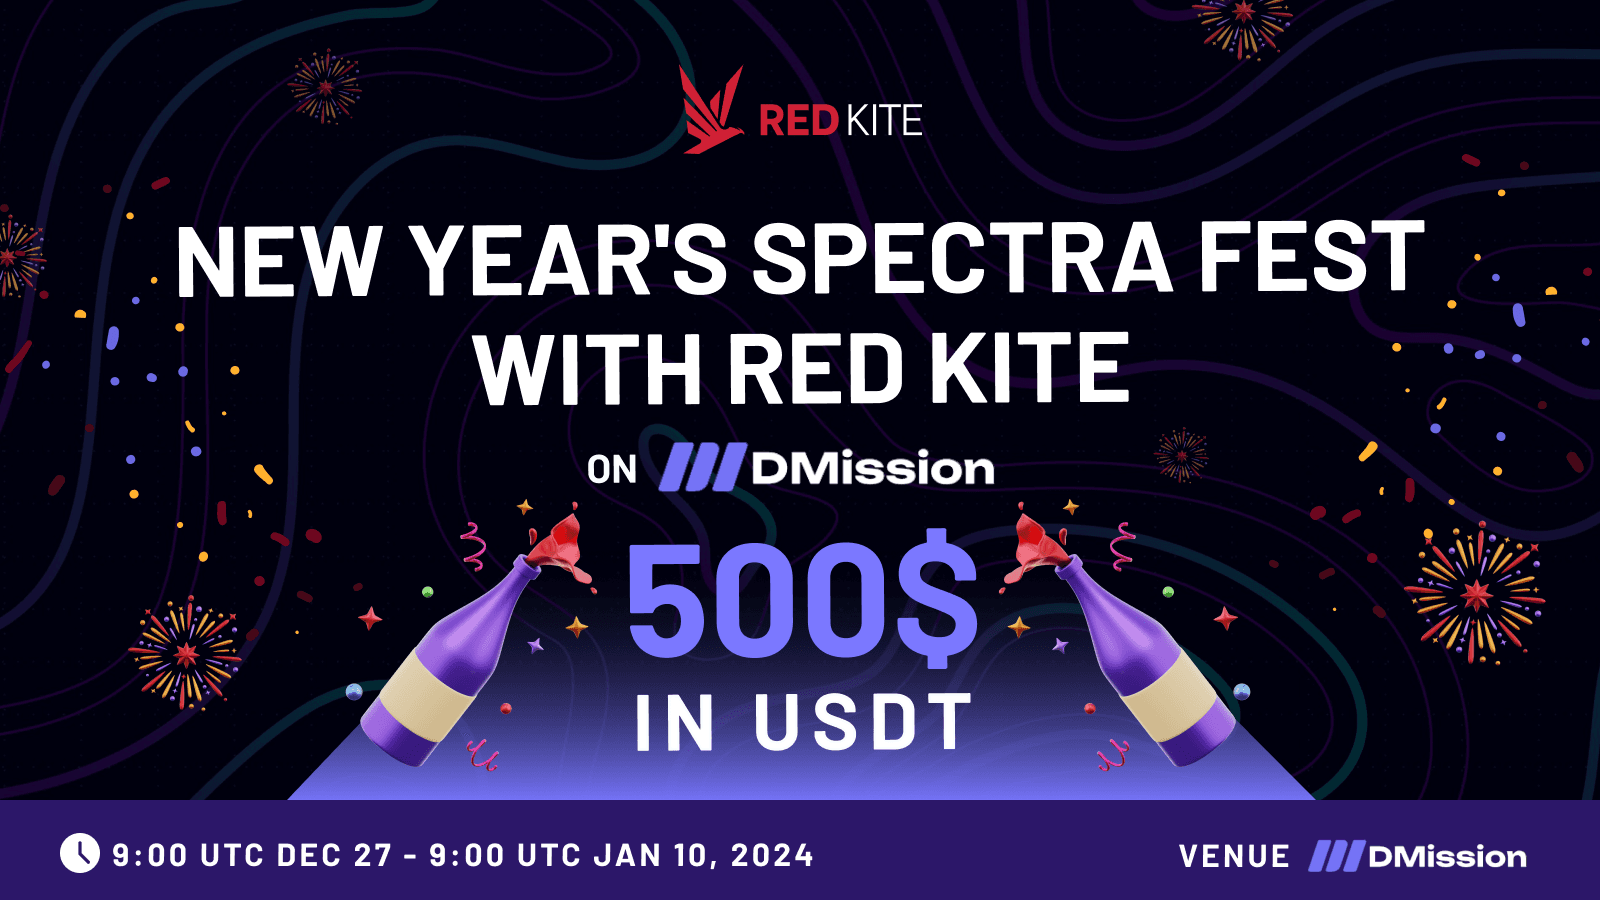 New Year's Spectra Fest With Red Kite